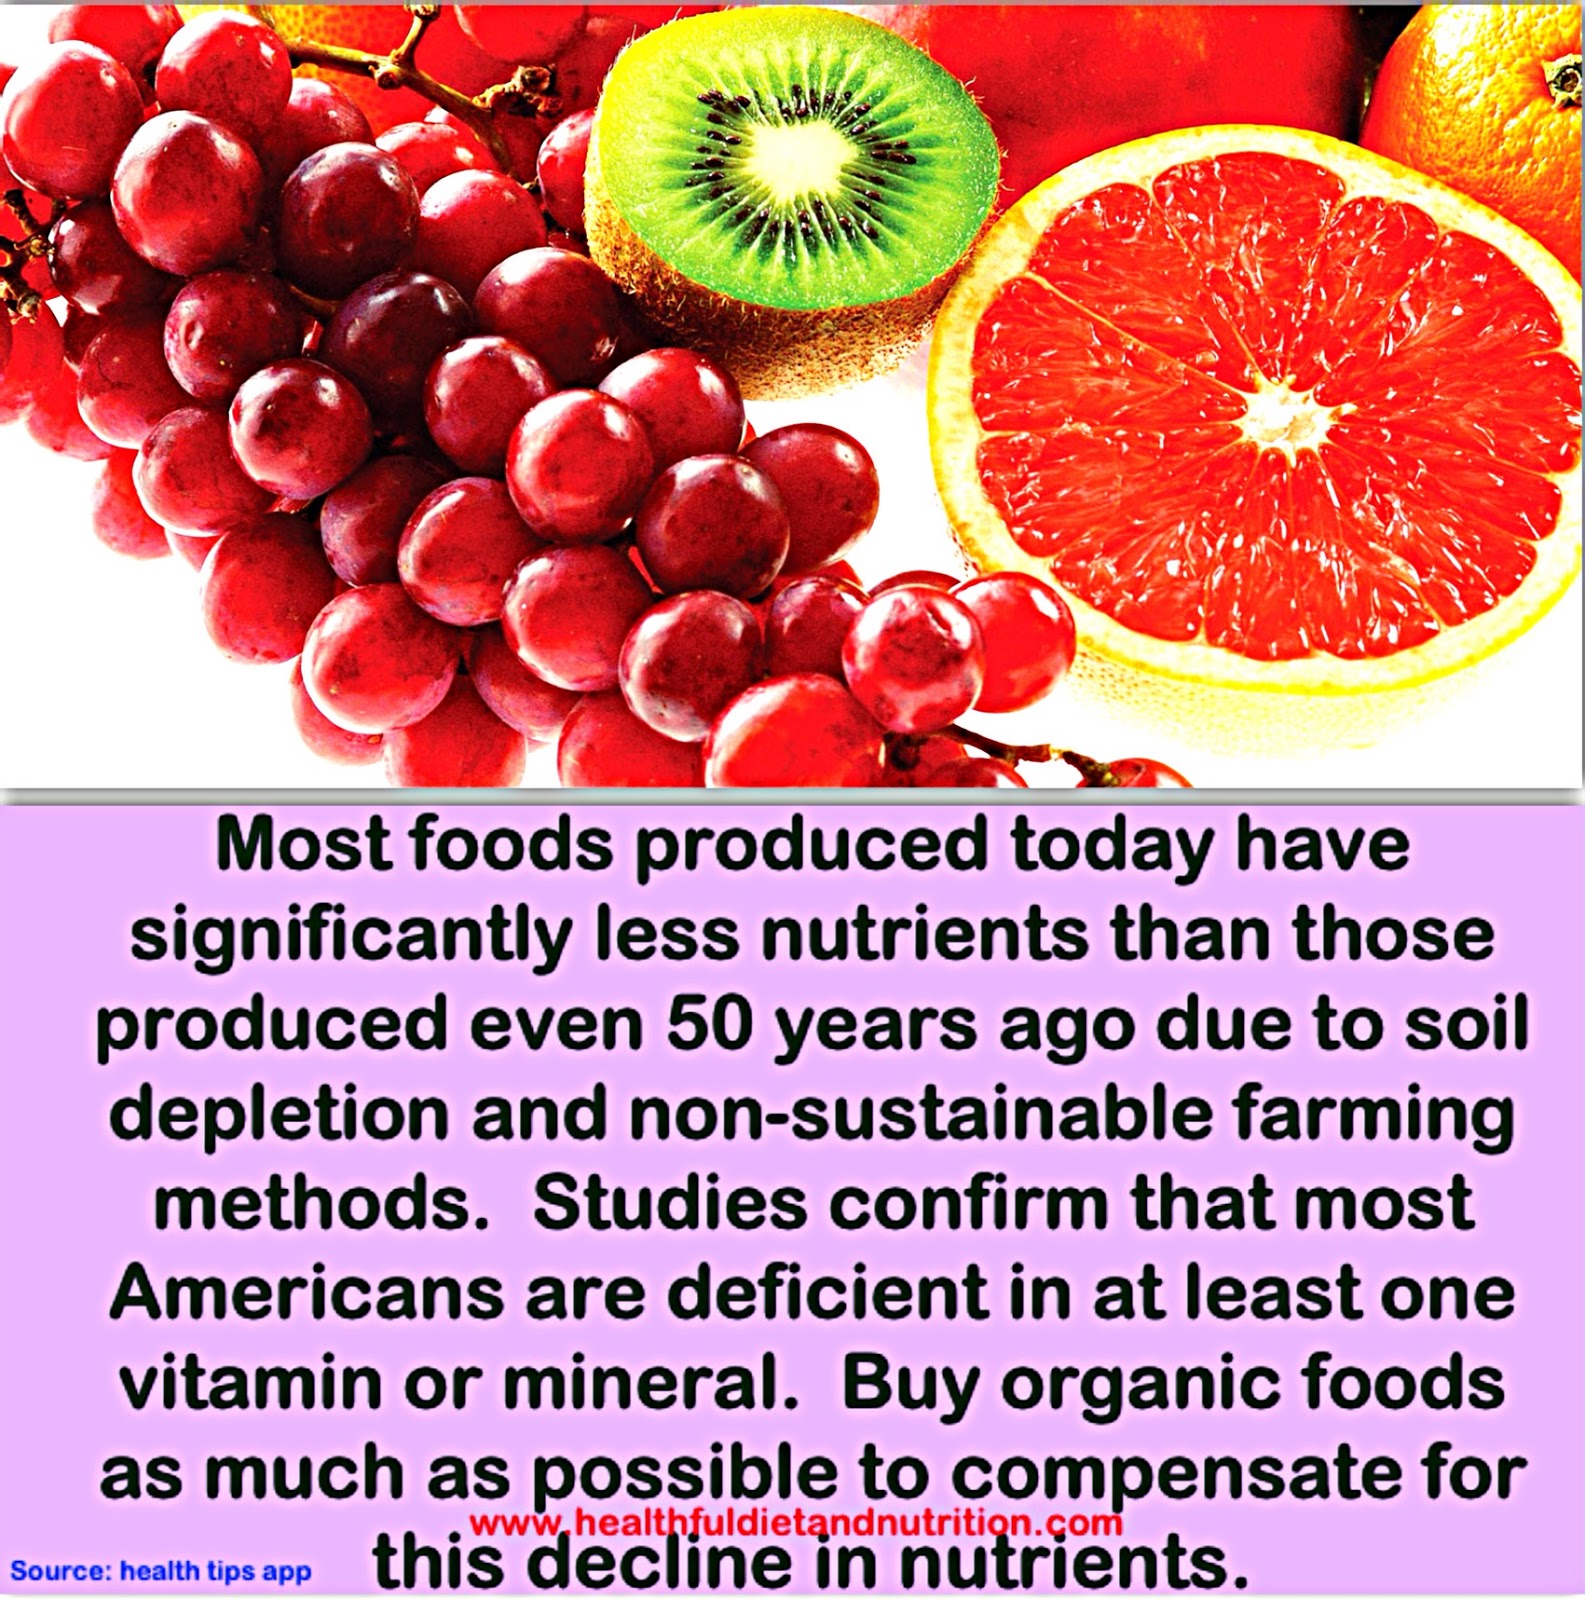 Eat Organic Foods To Compensate For The Decline Of Nutrients